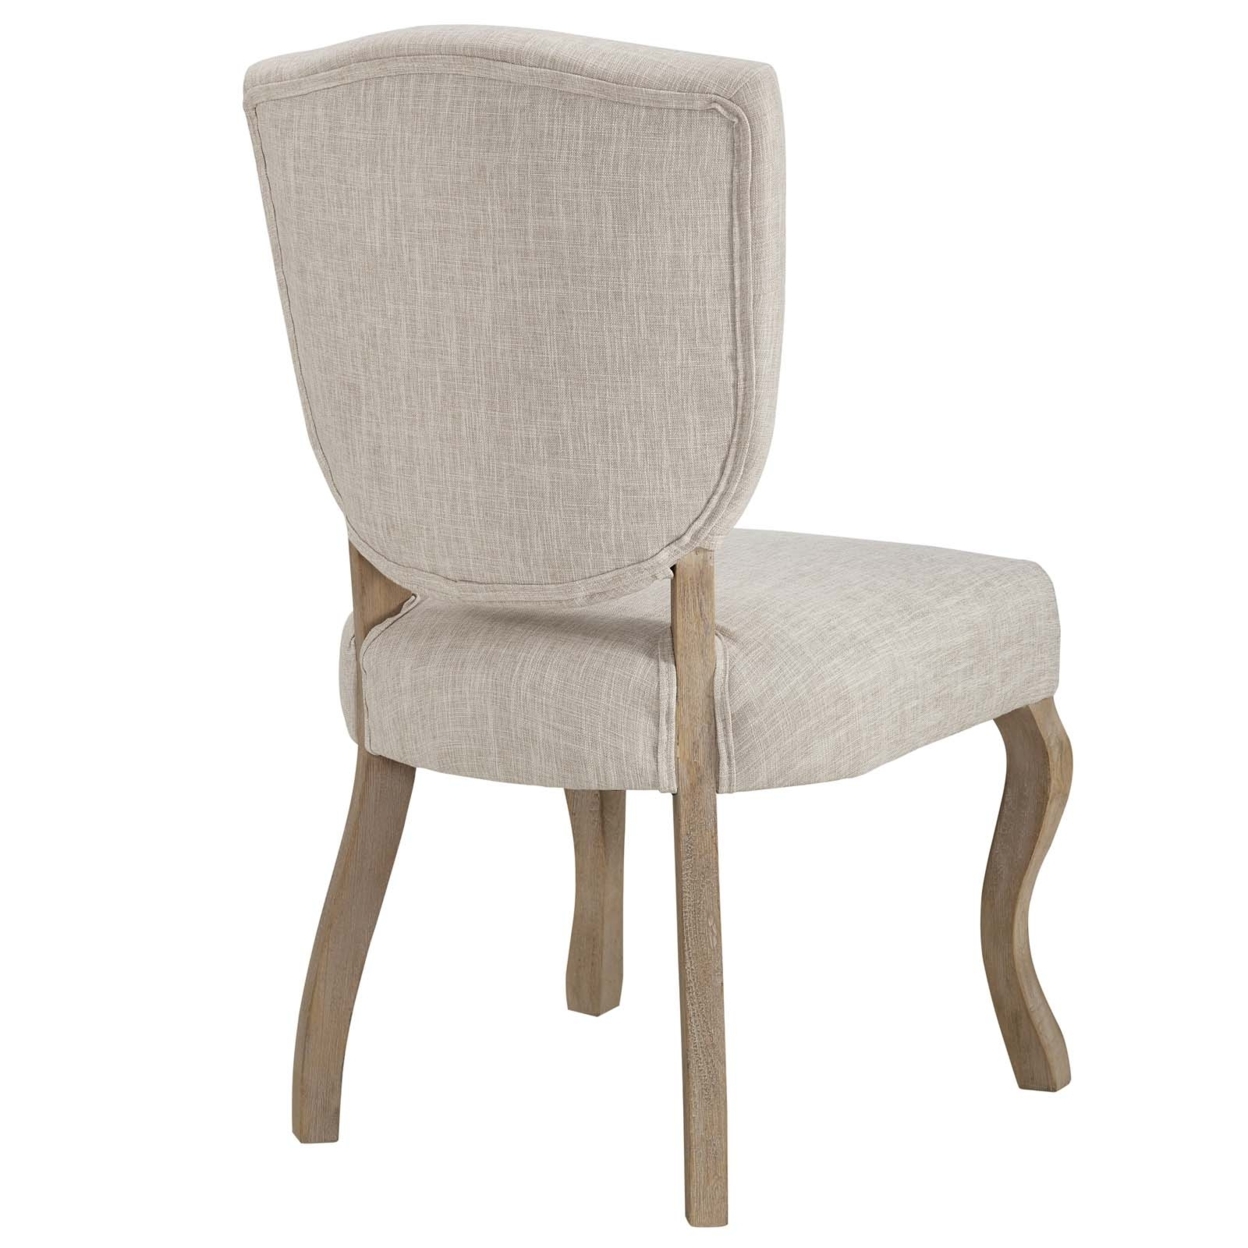 Array Vintage French Upholstered Dining Side Chair,Beige